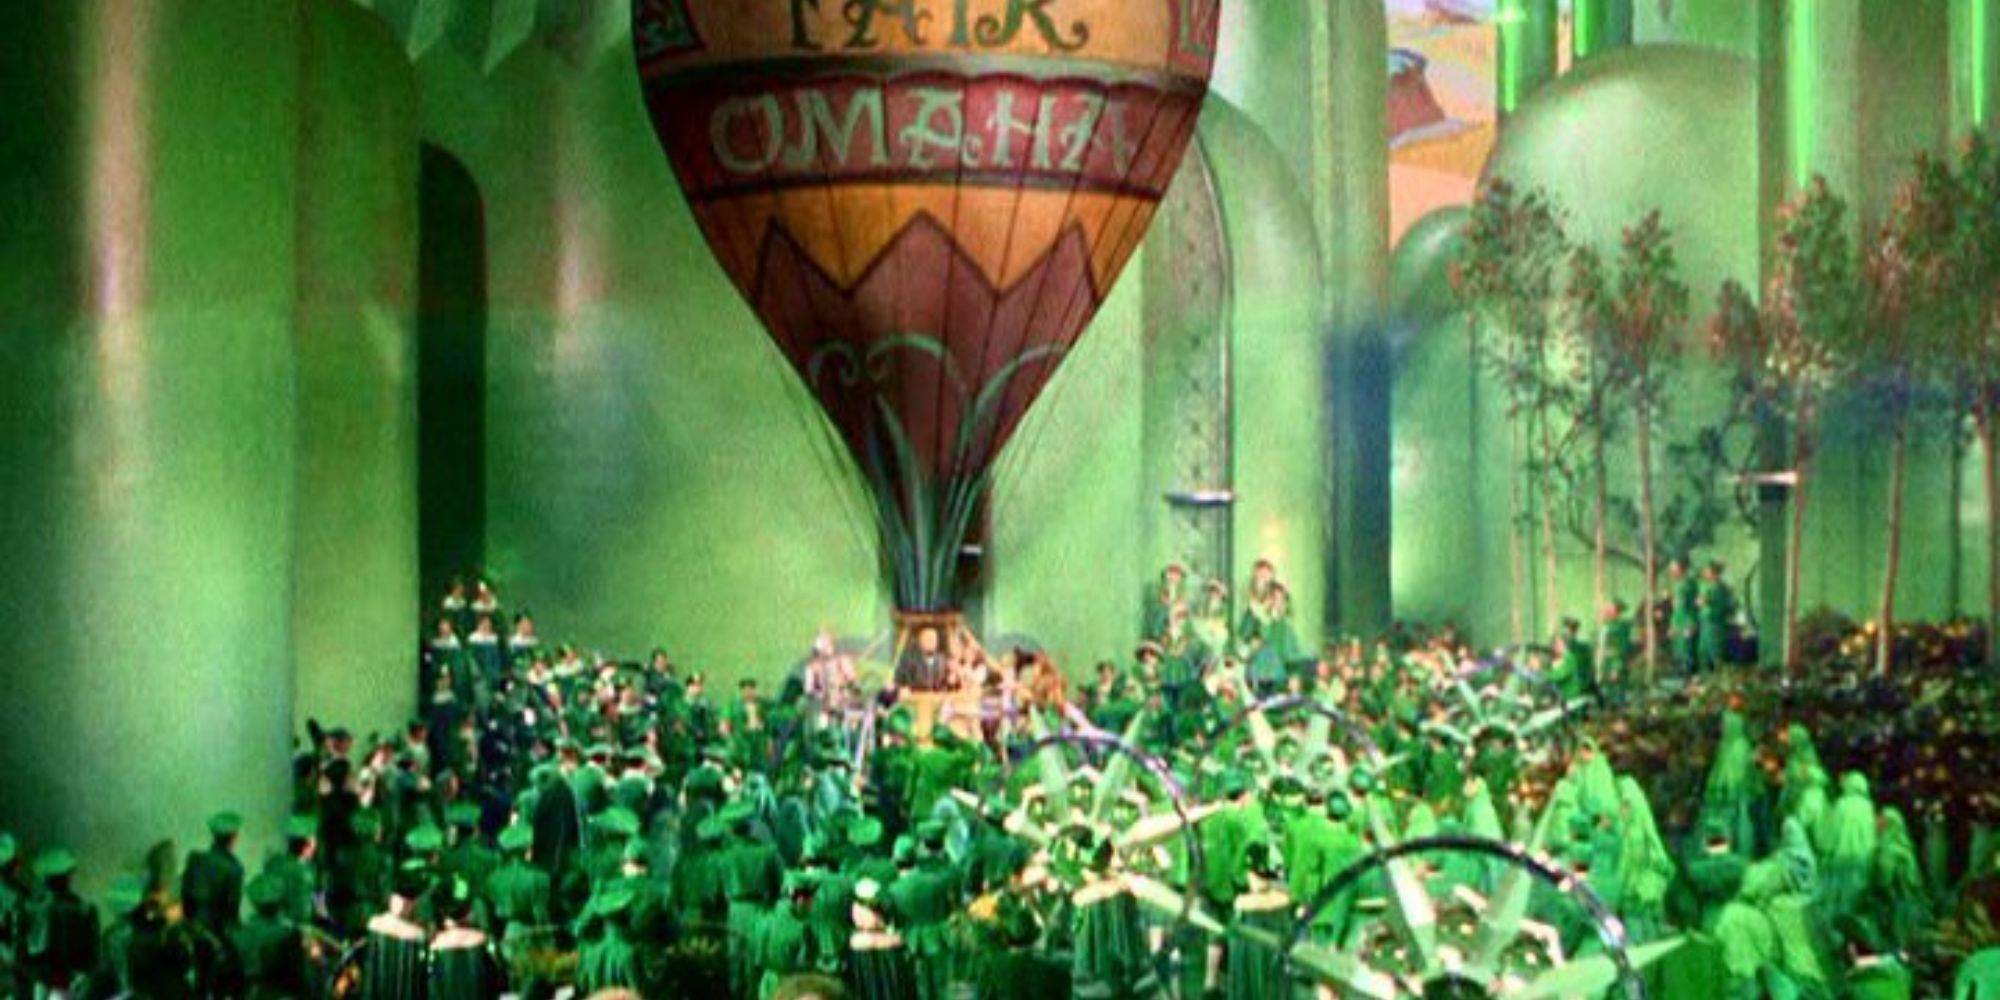 Oz prepares to take off in his hot air balloon in front of the denizens of the Emerald City